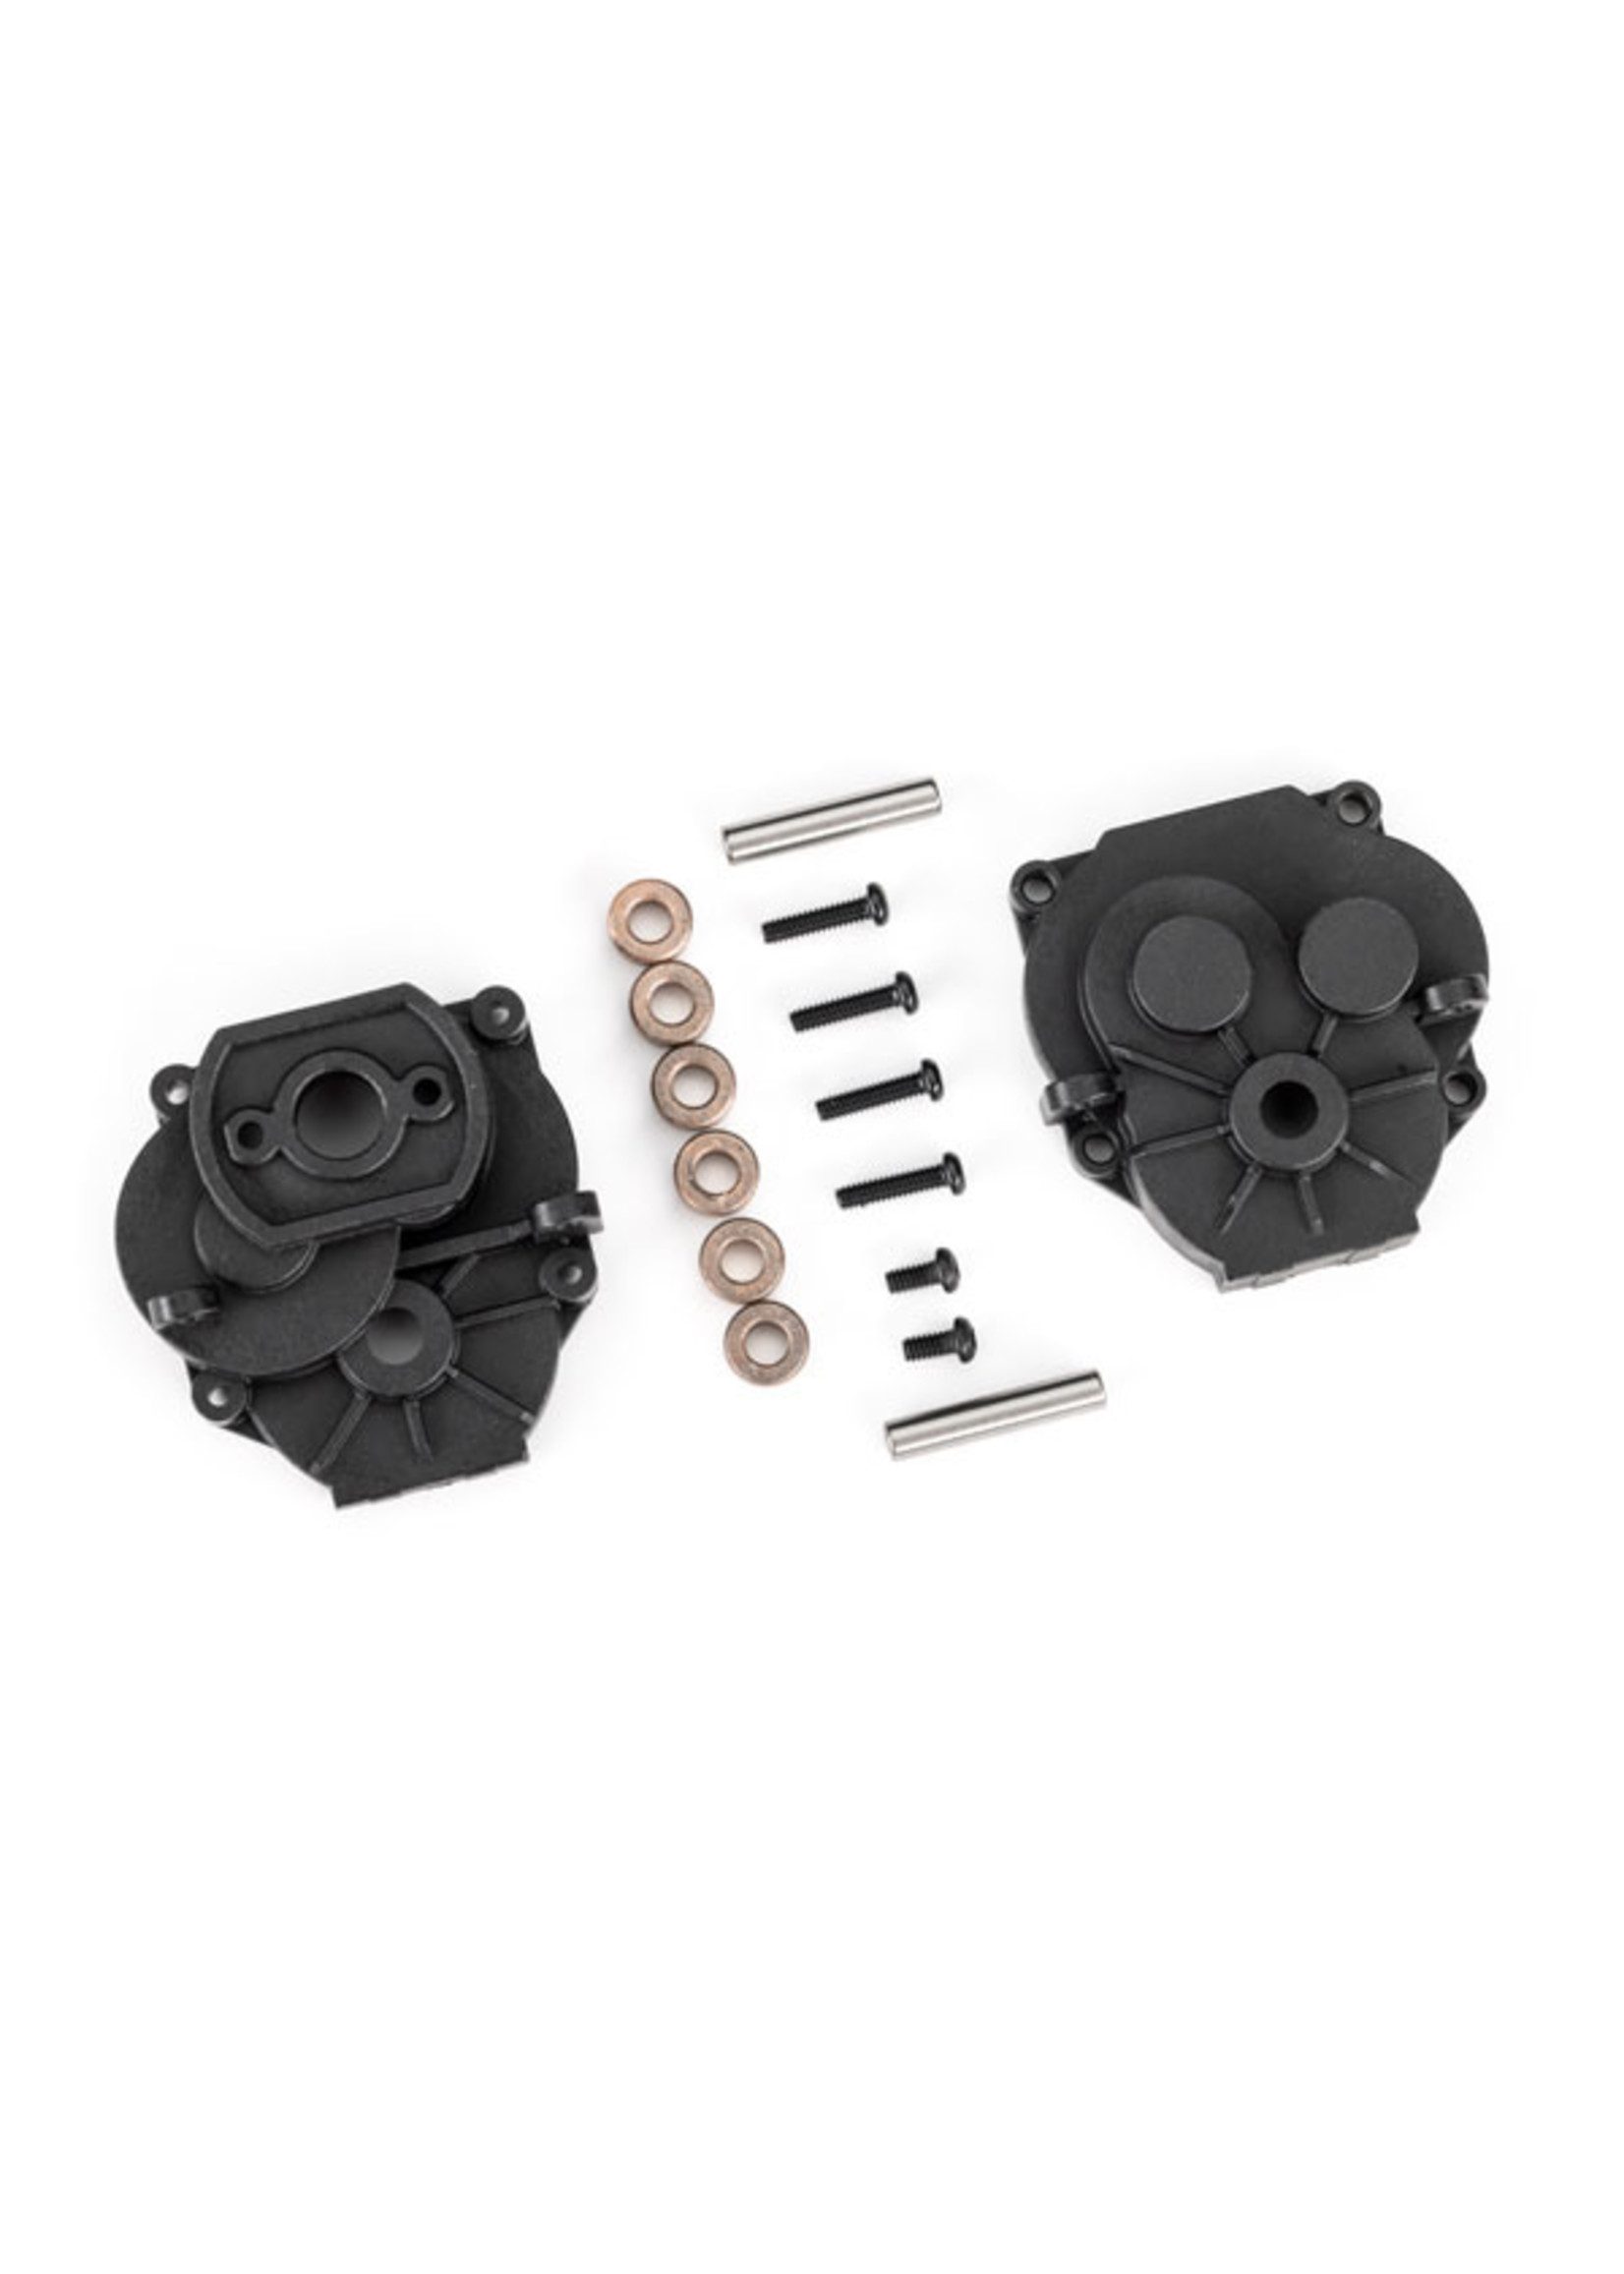 Traxxas 9747 - Gearbox housing, Front & Rear